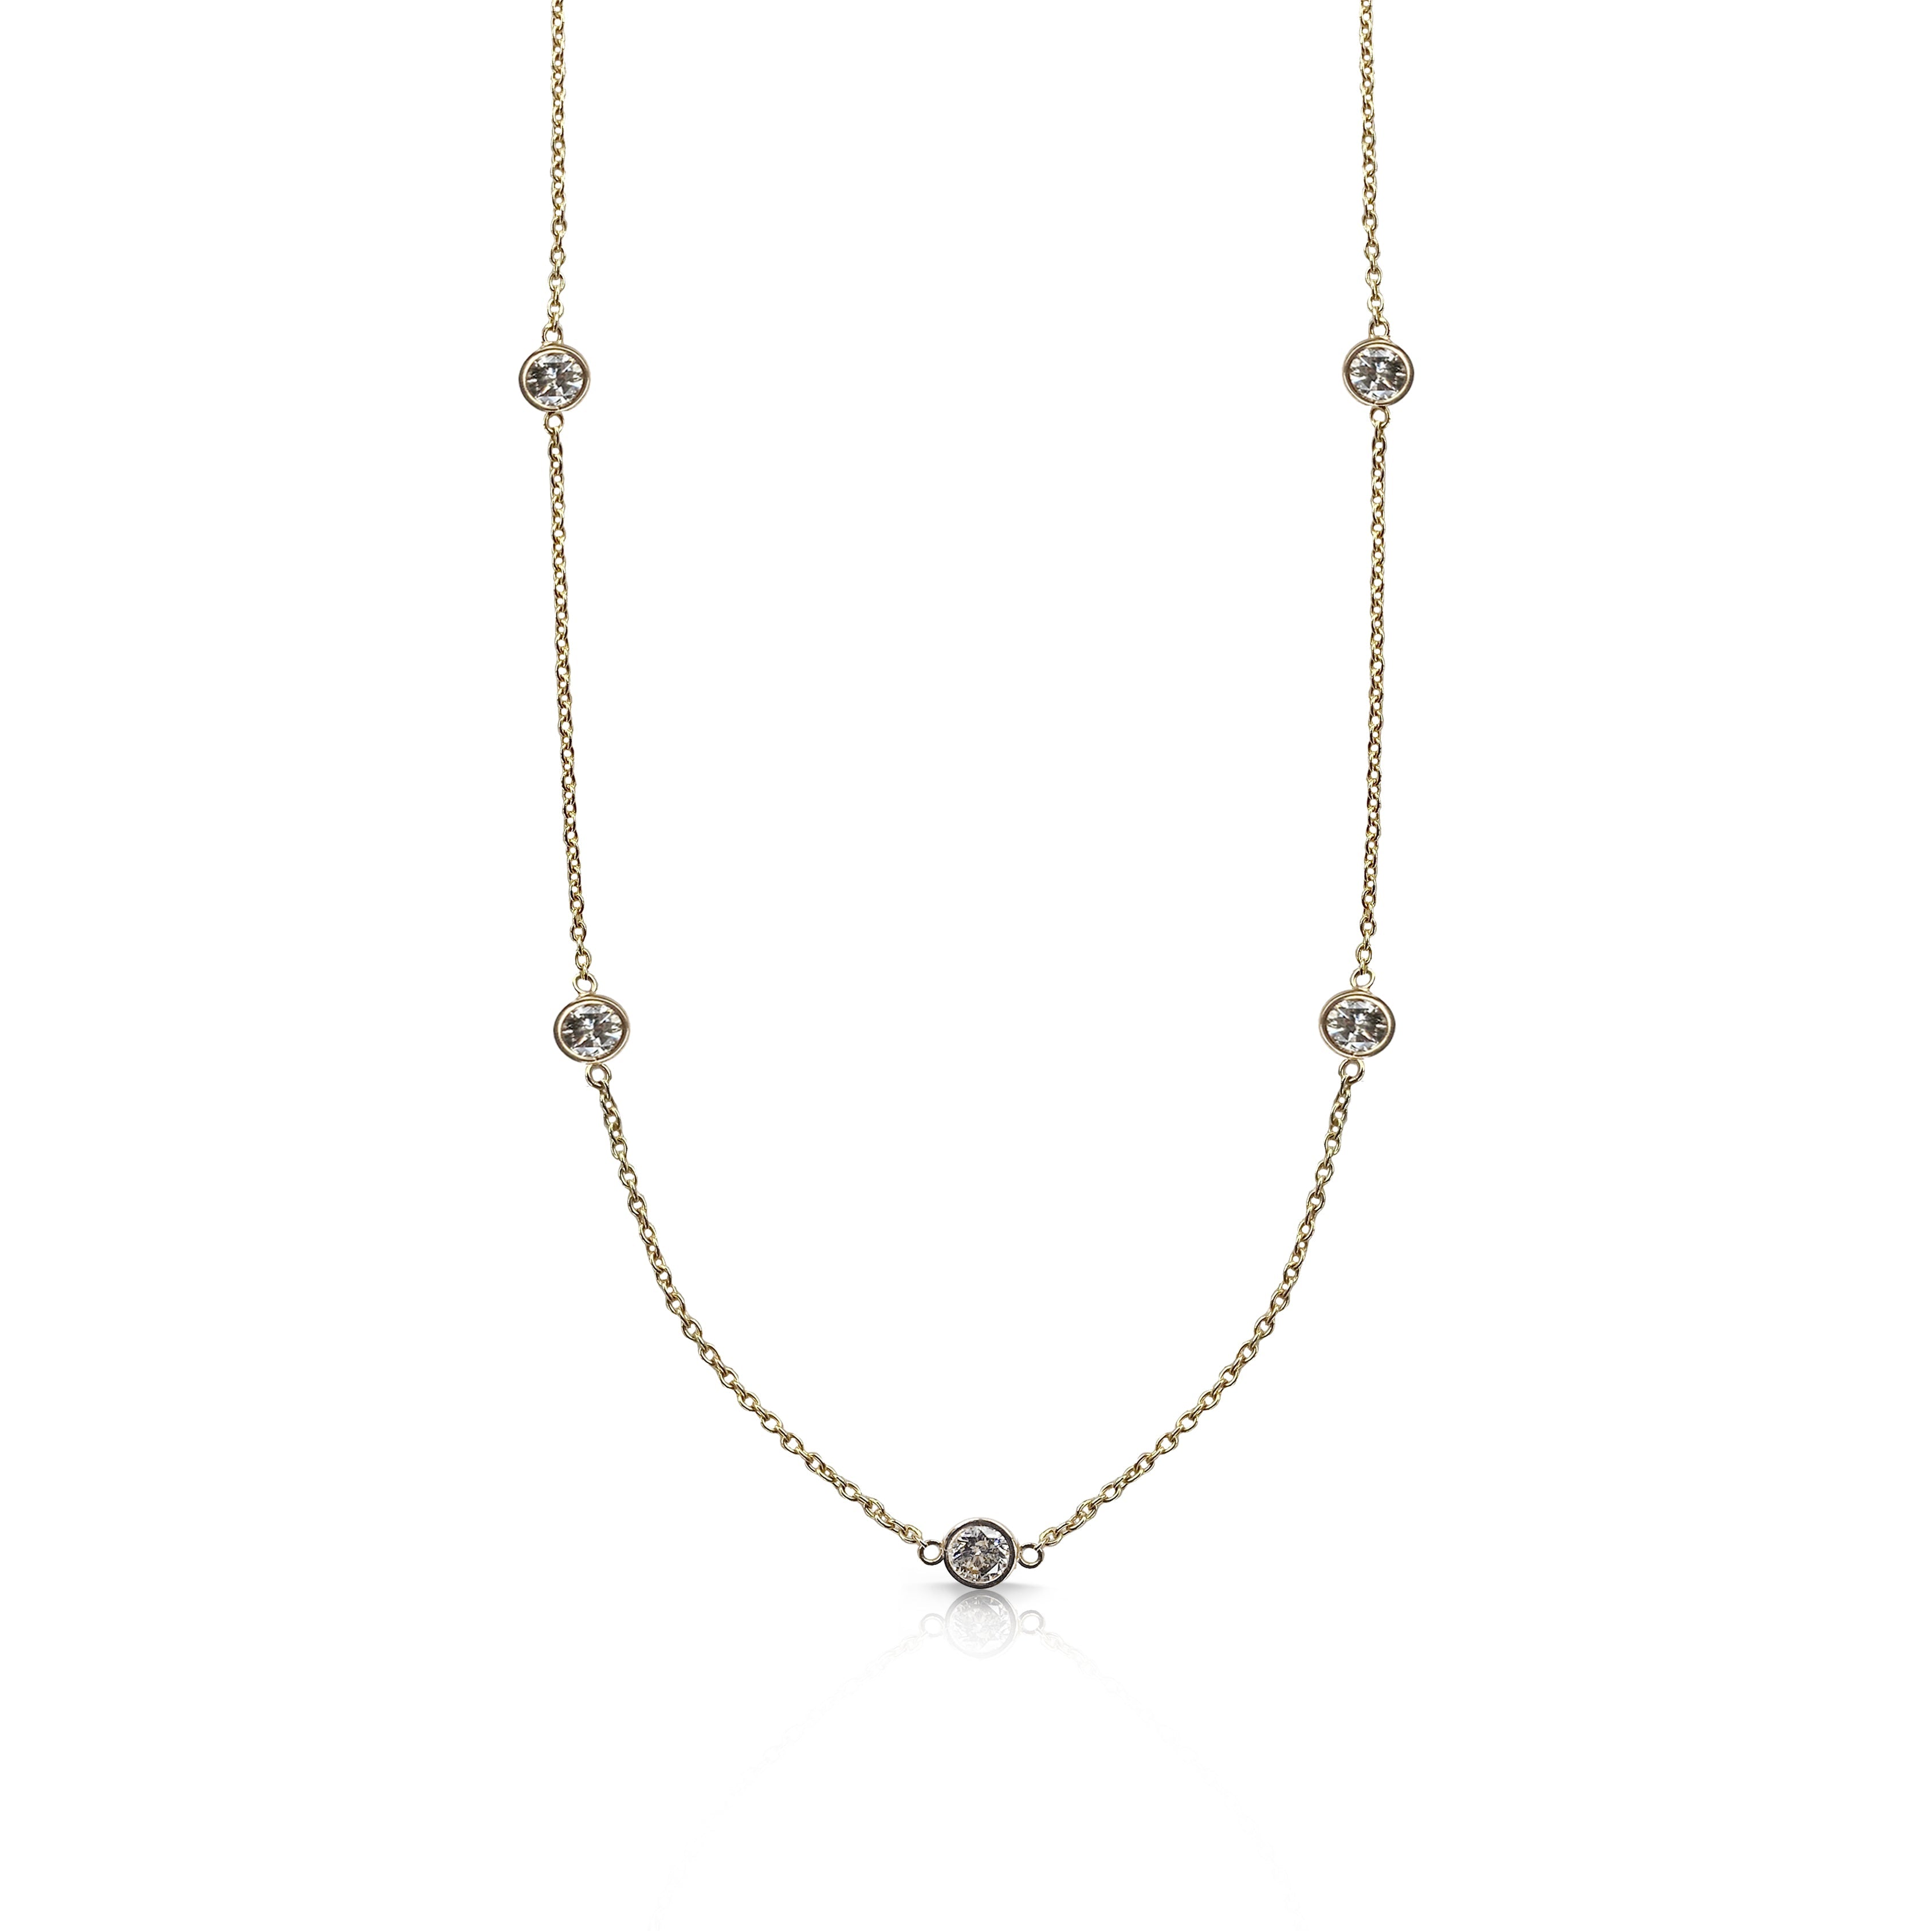 14k Yellow Gold Dainty Diamond Necklace by S.Carter Designs